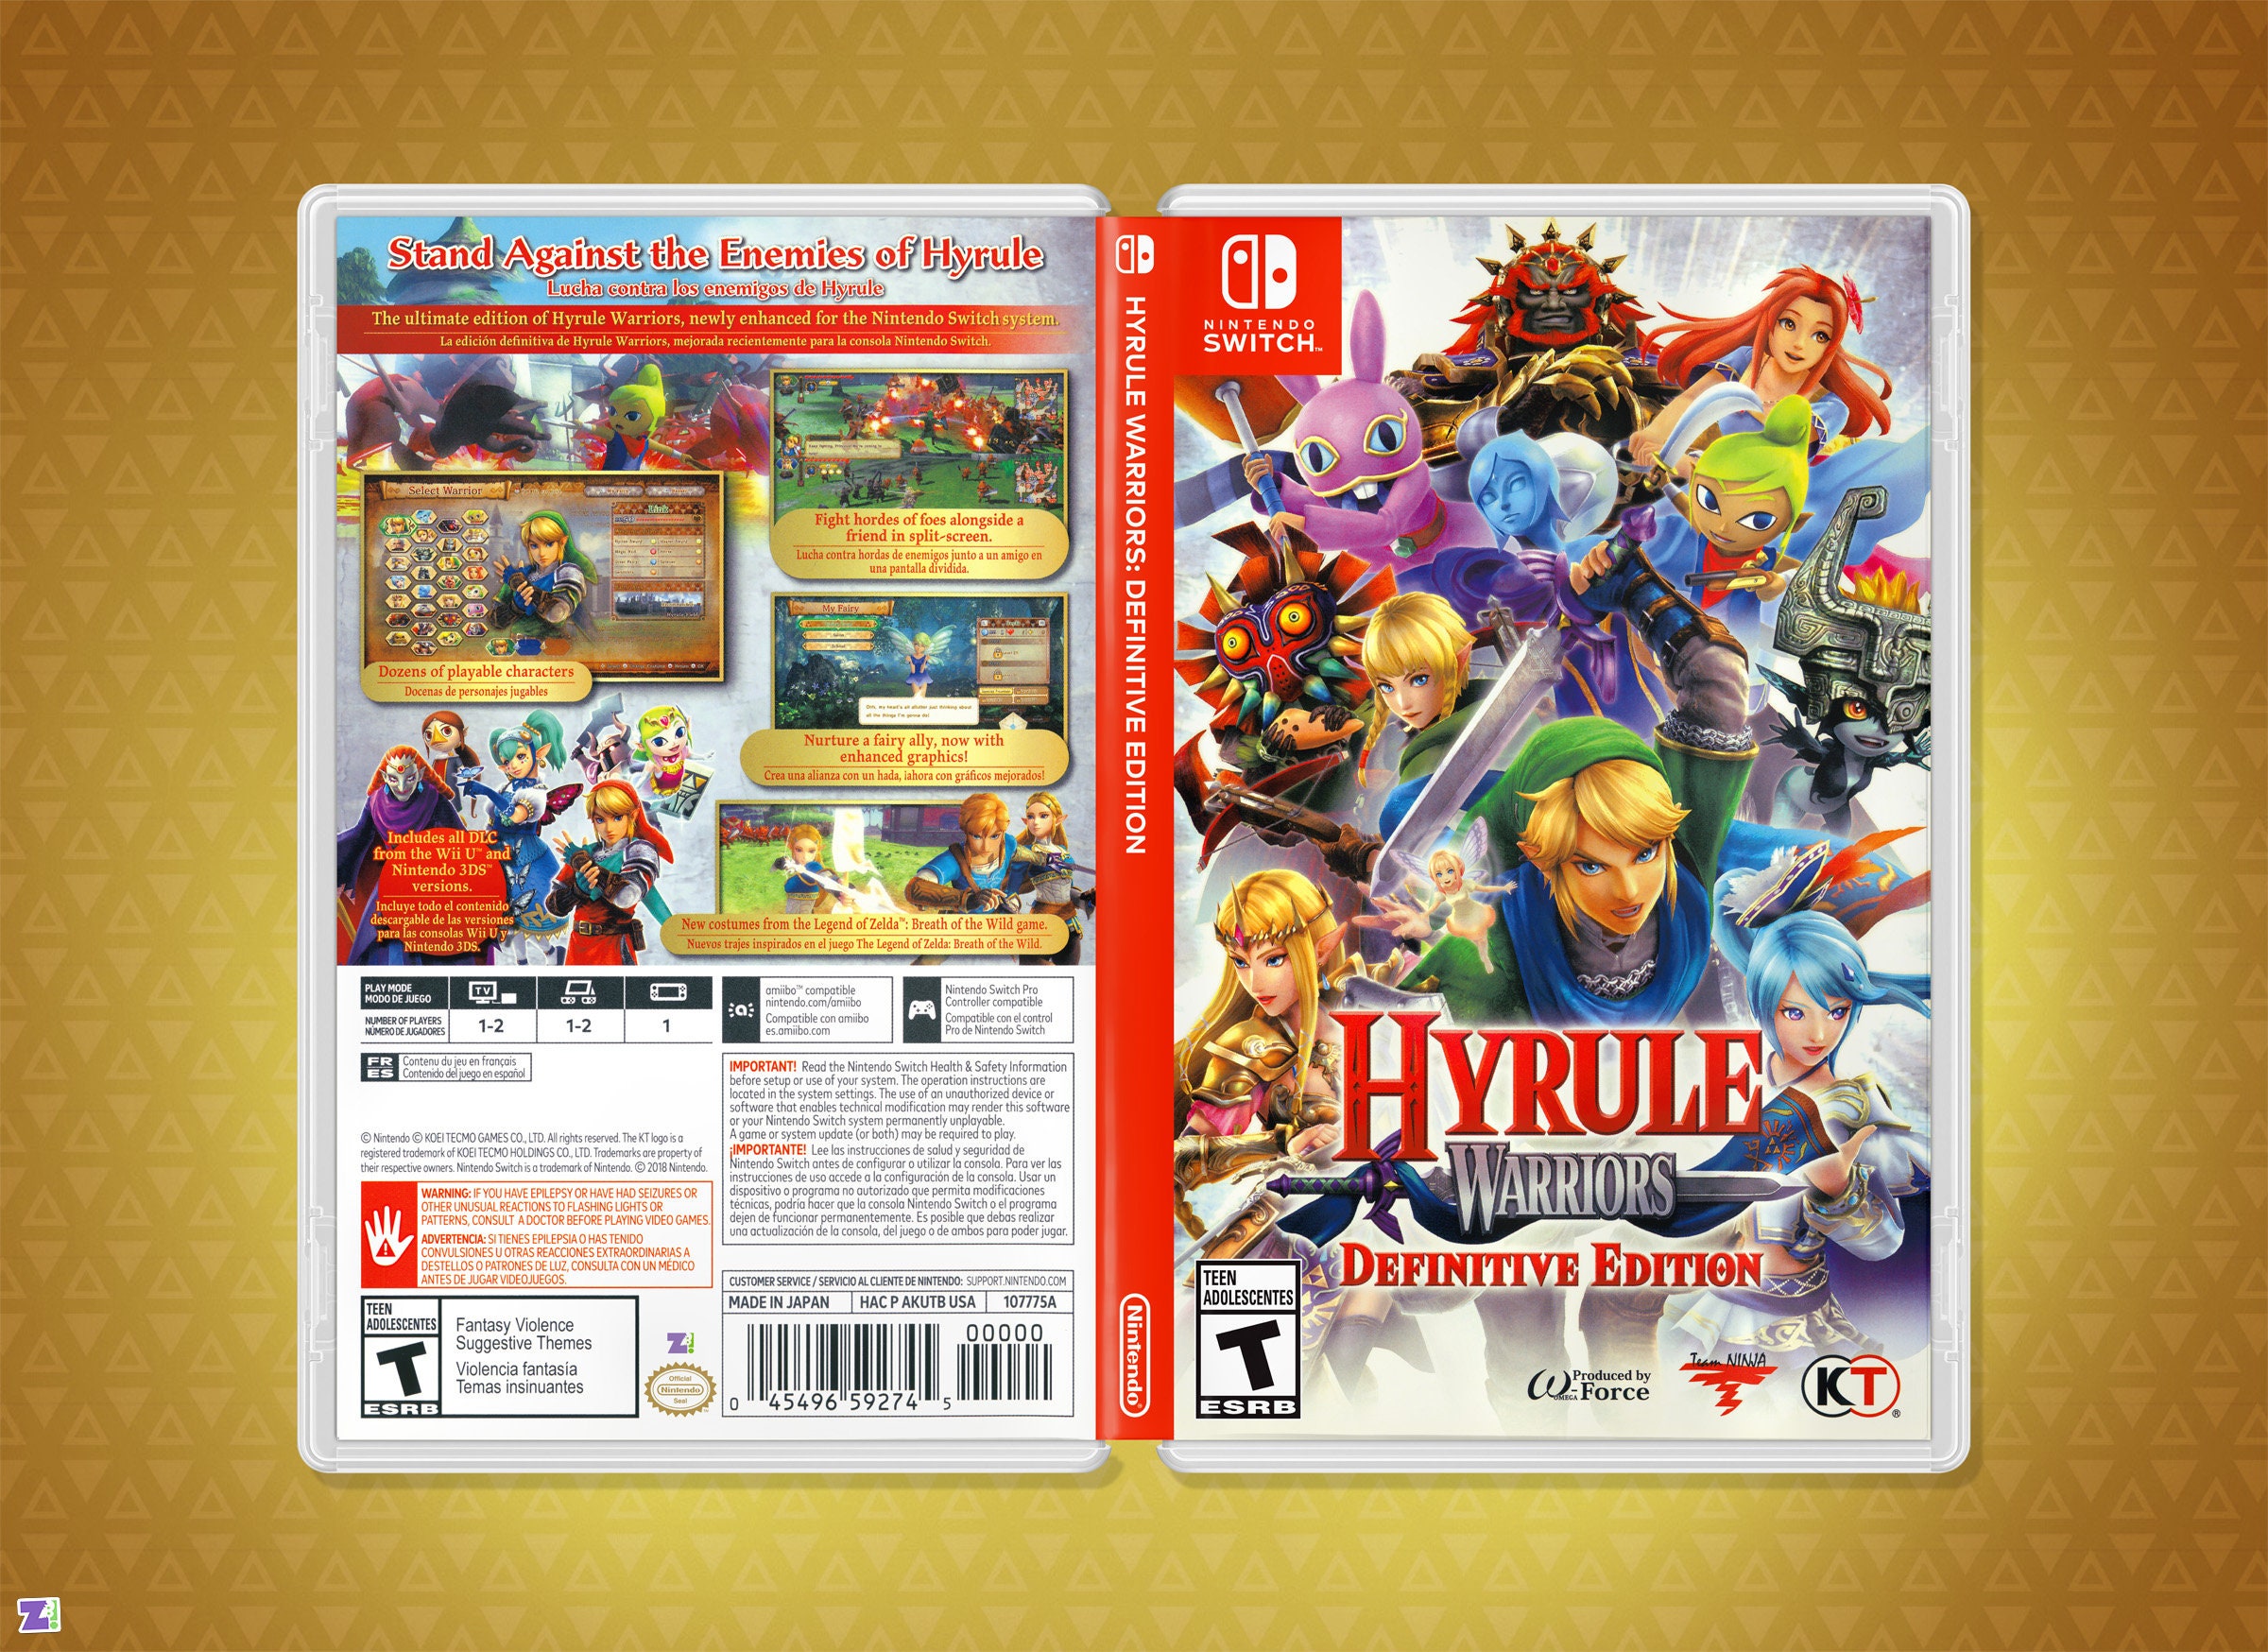 Hands On: Hyrule Warriors Gets Toon Makeover On 3DS